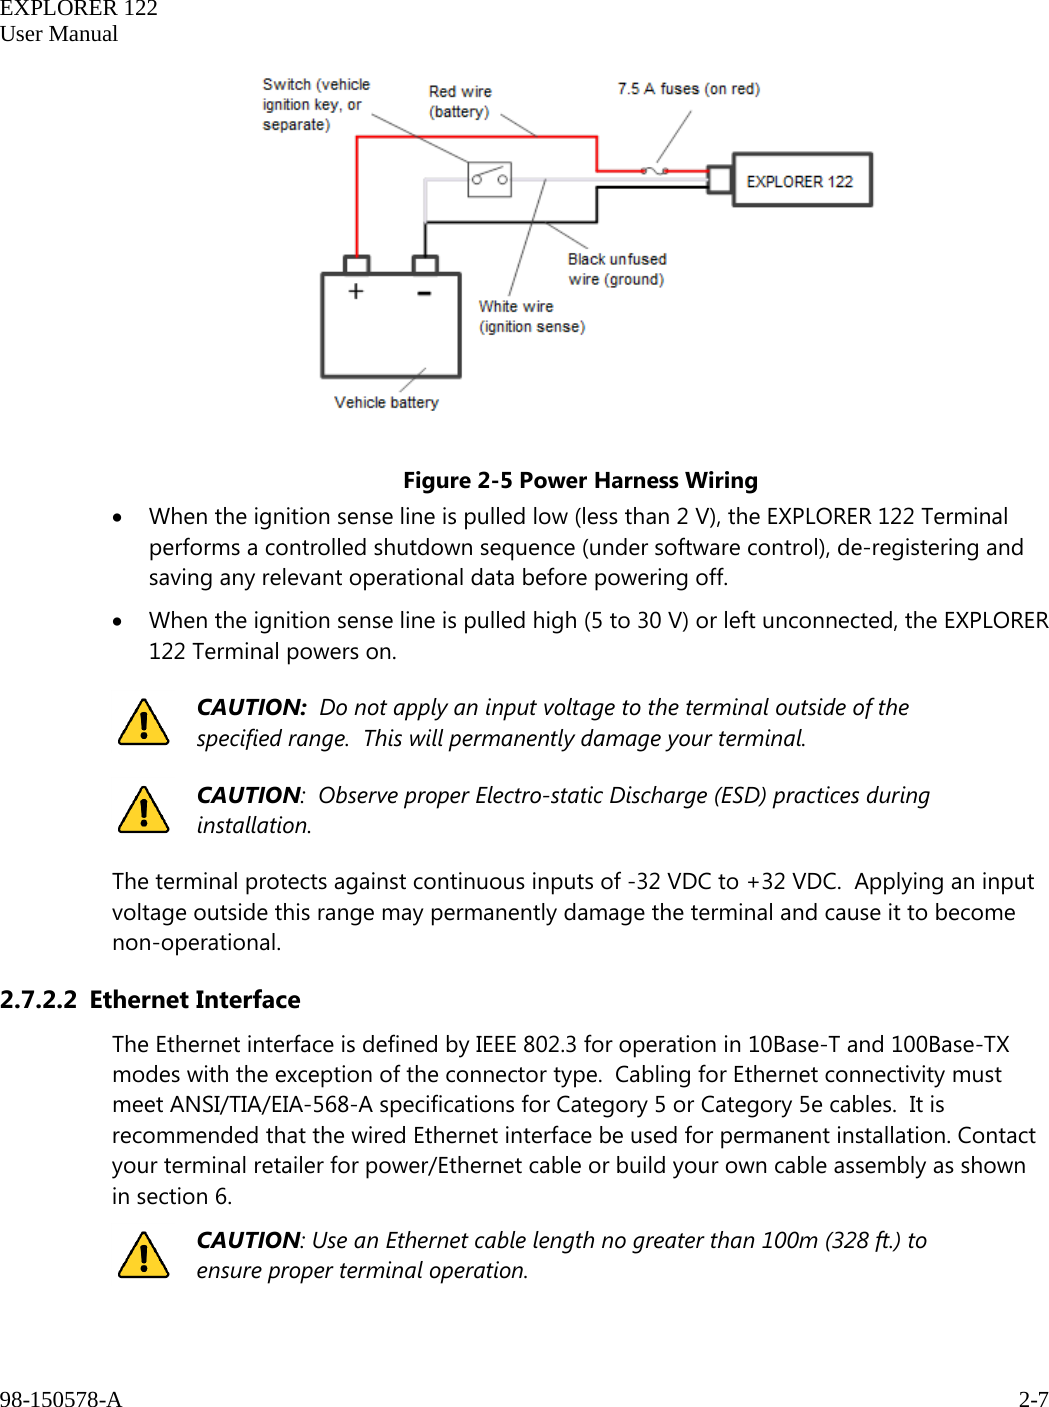   EXPLORER 122  User Manual  98-150578-A     2-7     Figure 2-5 Power Harness Wiring • When the ignition sense line is pulled low (less than 2 V), the EXPLORER 122 Terminal performs a controlled shutdown sequence (under software control), de-registering and saving any relevant operational data before powering off. • When the ignition sense line is pulled high (5 to 30 V) or left unconnected, the EXPLORER 122 Terminal powers on.  CAUTION:  Do not apply an input voltage to the terminal outside of the specified range.  This will permanently damage your terminal.  CAUTION:  Observe proper Electro-static Discharge (ESD) practices during installation.  The terminal protects against continuous inputs of -32 VDC to +32 VDC.  Applying an input voltage outside this range may permanently damage the terminal and cause it to become non-operational. 2.7.2.2 Ethernet Interface The Ethernet interface is defined by IEEE 802.3 for operation in 10Base-T and 100Base-TX modes with the exception of the connector type.  Cabling for Ethernet connectivity must meet ANSI/TIA/EIA-568-A specifications for Category 5 or Category 5e cables.  It is recommended that the wired Ethernet interface be used for permanent installation. Contact your terminal retailer for power/Ethernet cable or build your own cable assembly as shown in section 6.  CAUTION: Use an Ethernet cable length no greater than 100m (328 ft.) to ensure proper terminal operation.  